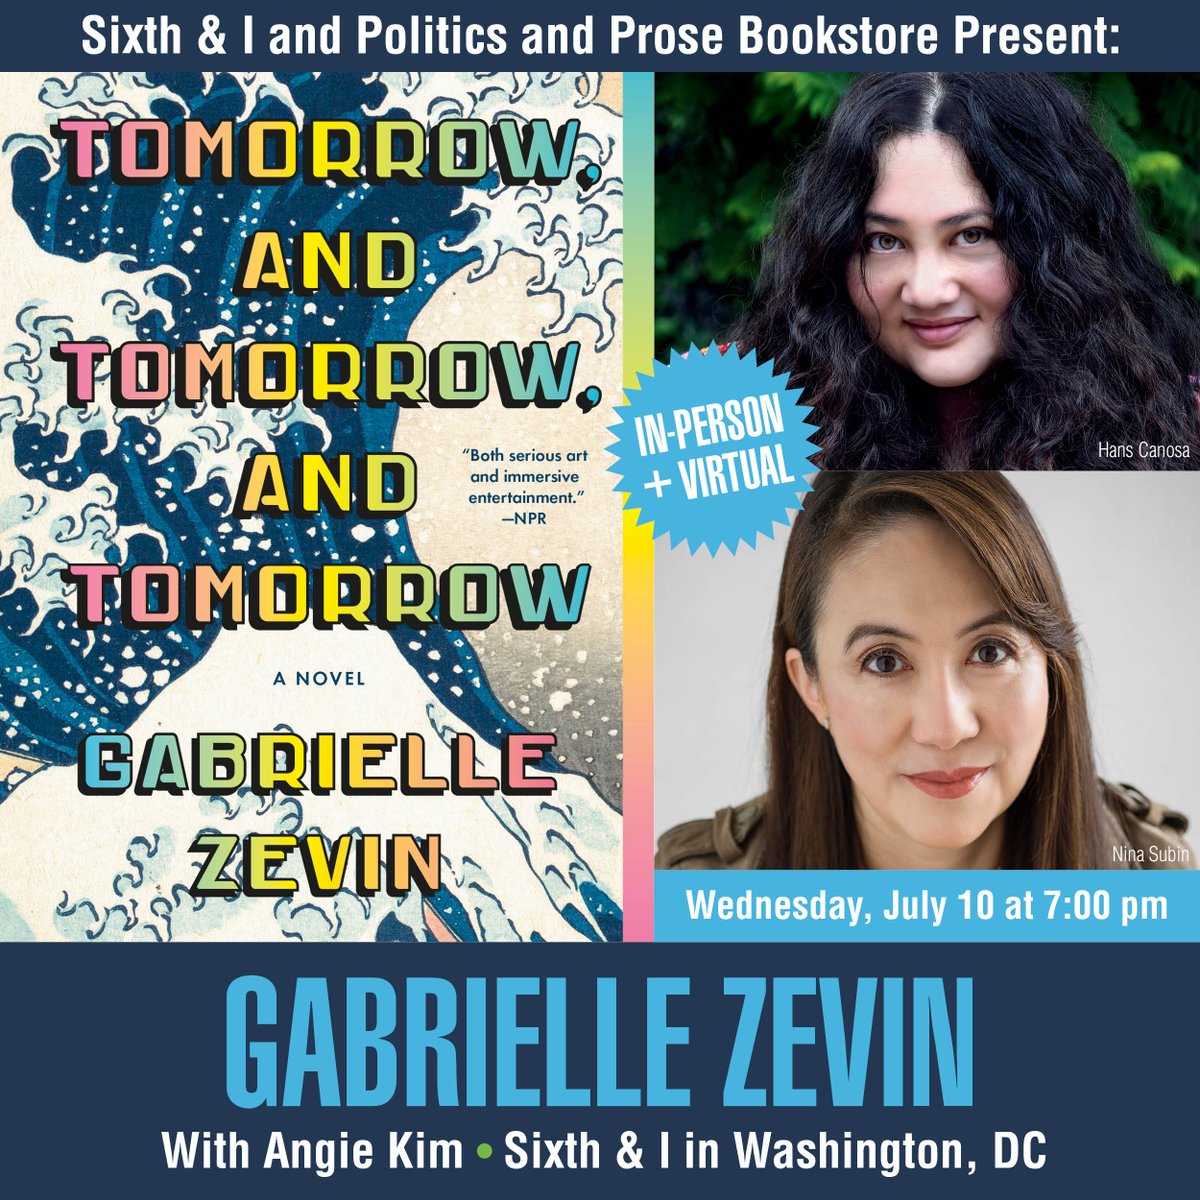 In case you missed it, New York Times bestselling author Gabrielle Zevin will be at Sixth & I in conversation with @AngieKimWriter in celebration of the paperback release of Tomorrow, and Tomorrow, and Tomorrow. Tickets: bit.ly/3WxQGaL (with @PoliticsProse)